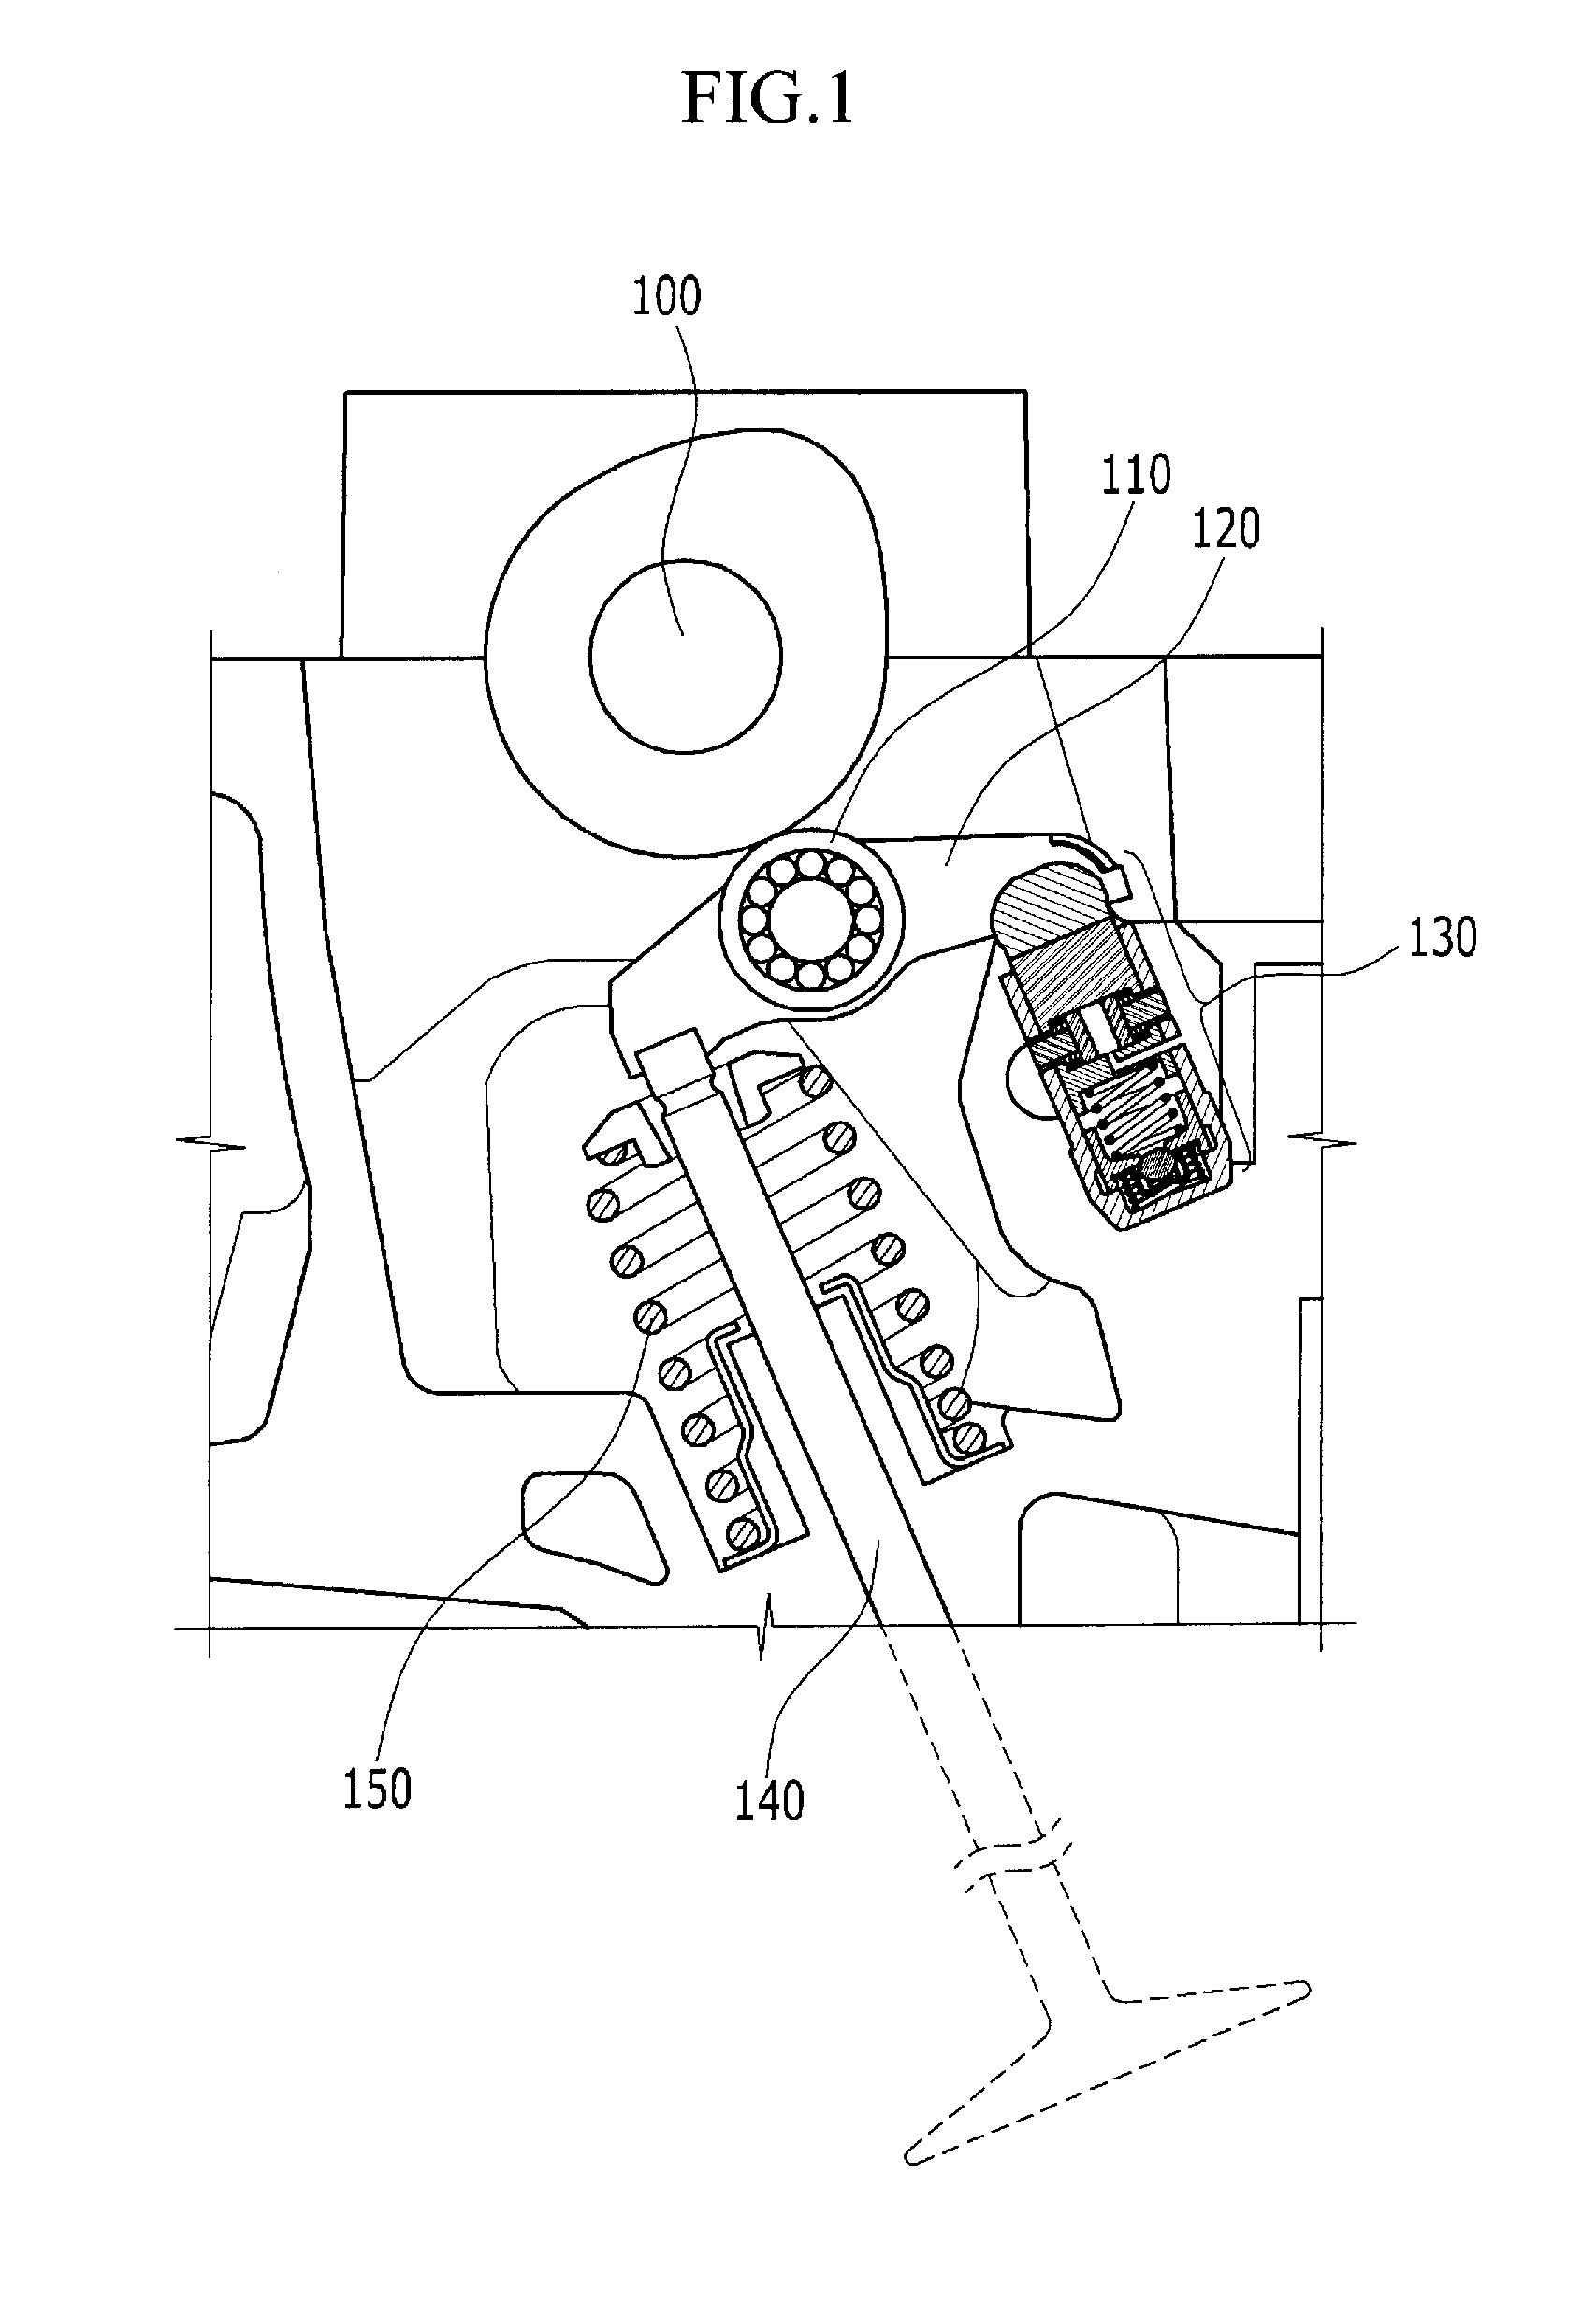 Engine that is Equipped with Variable Valve Device